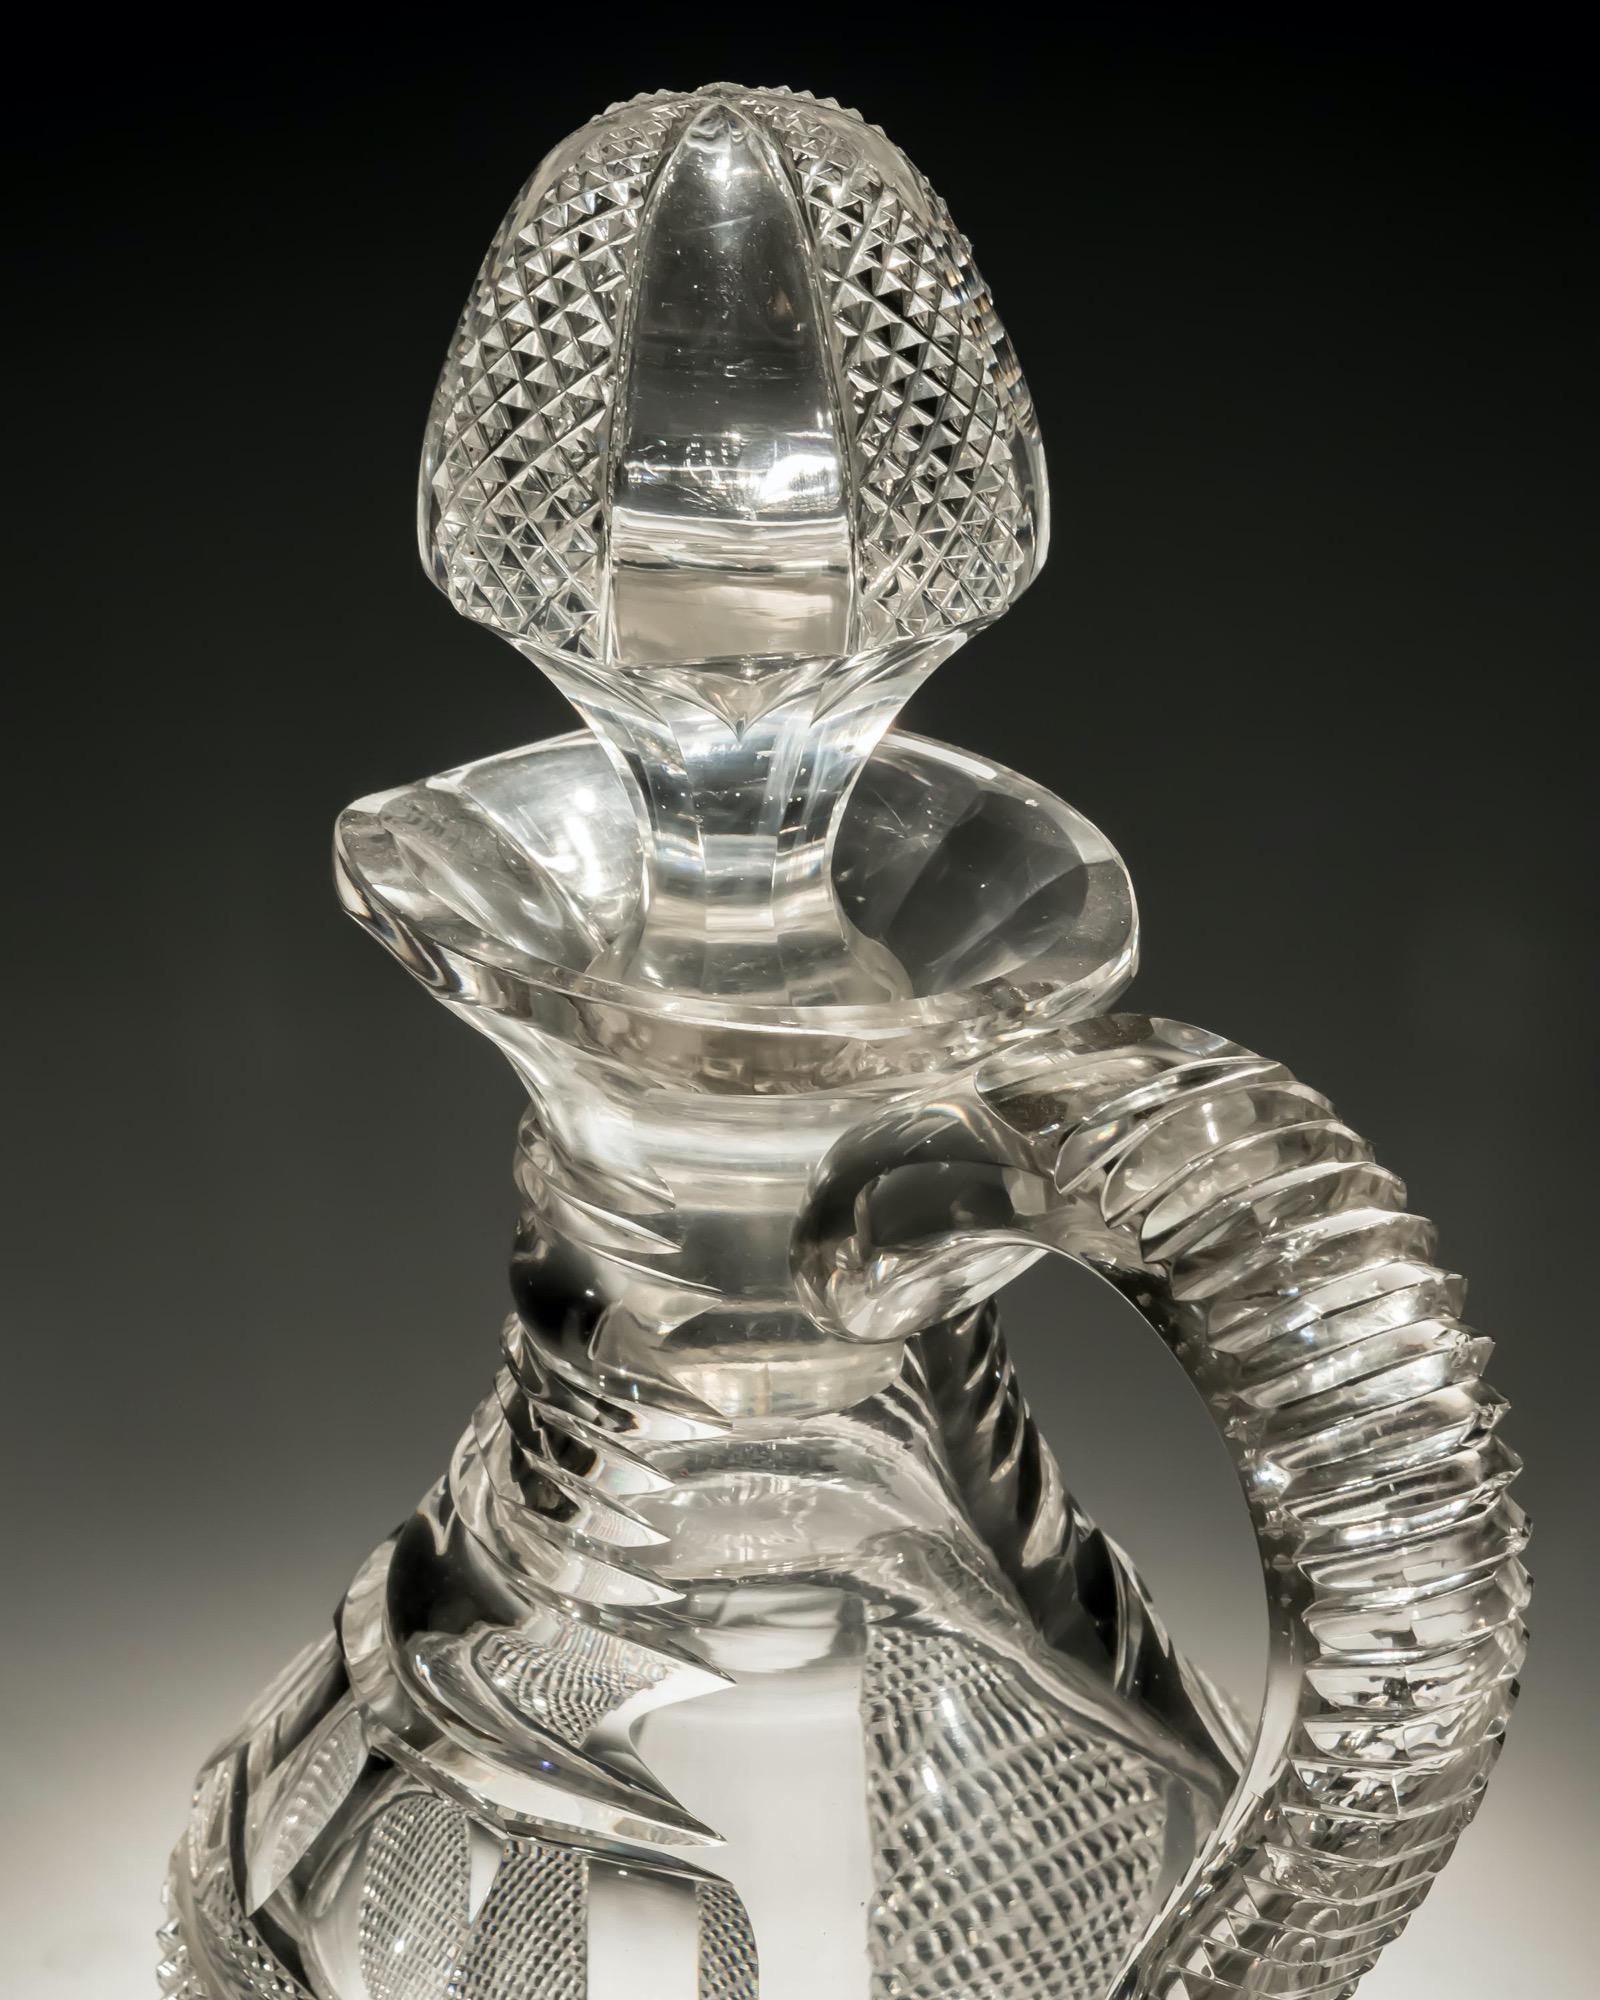 A fine diamond and pillar cut Regency claret jug with matching stopper.
Measures: height 30 cm (11 3/4